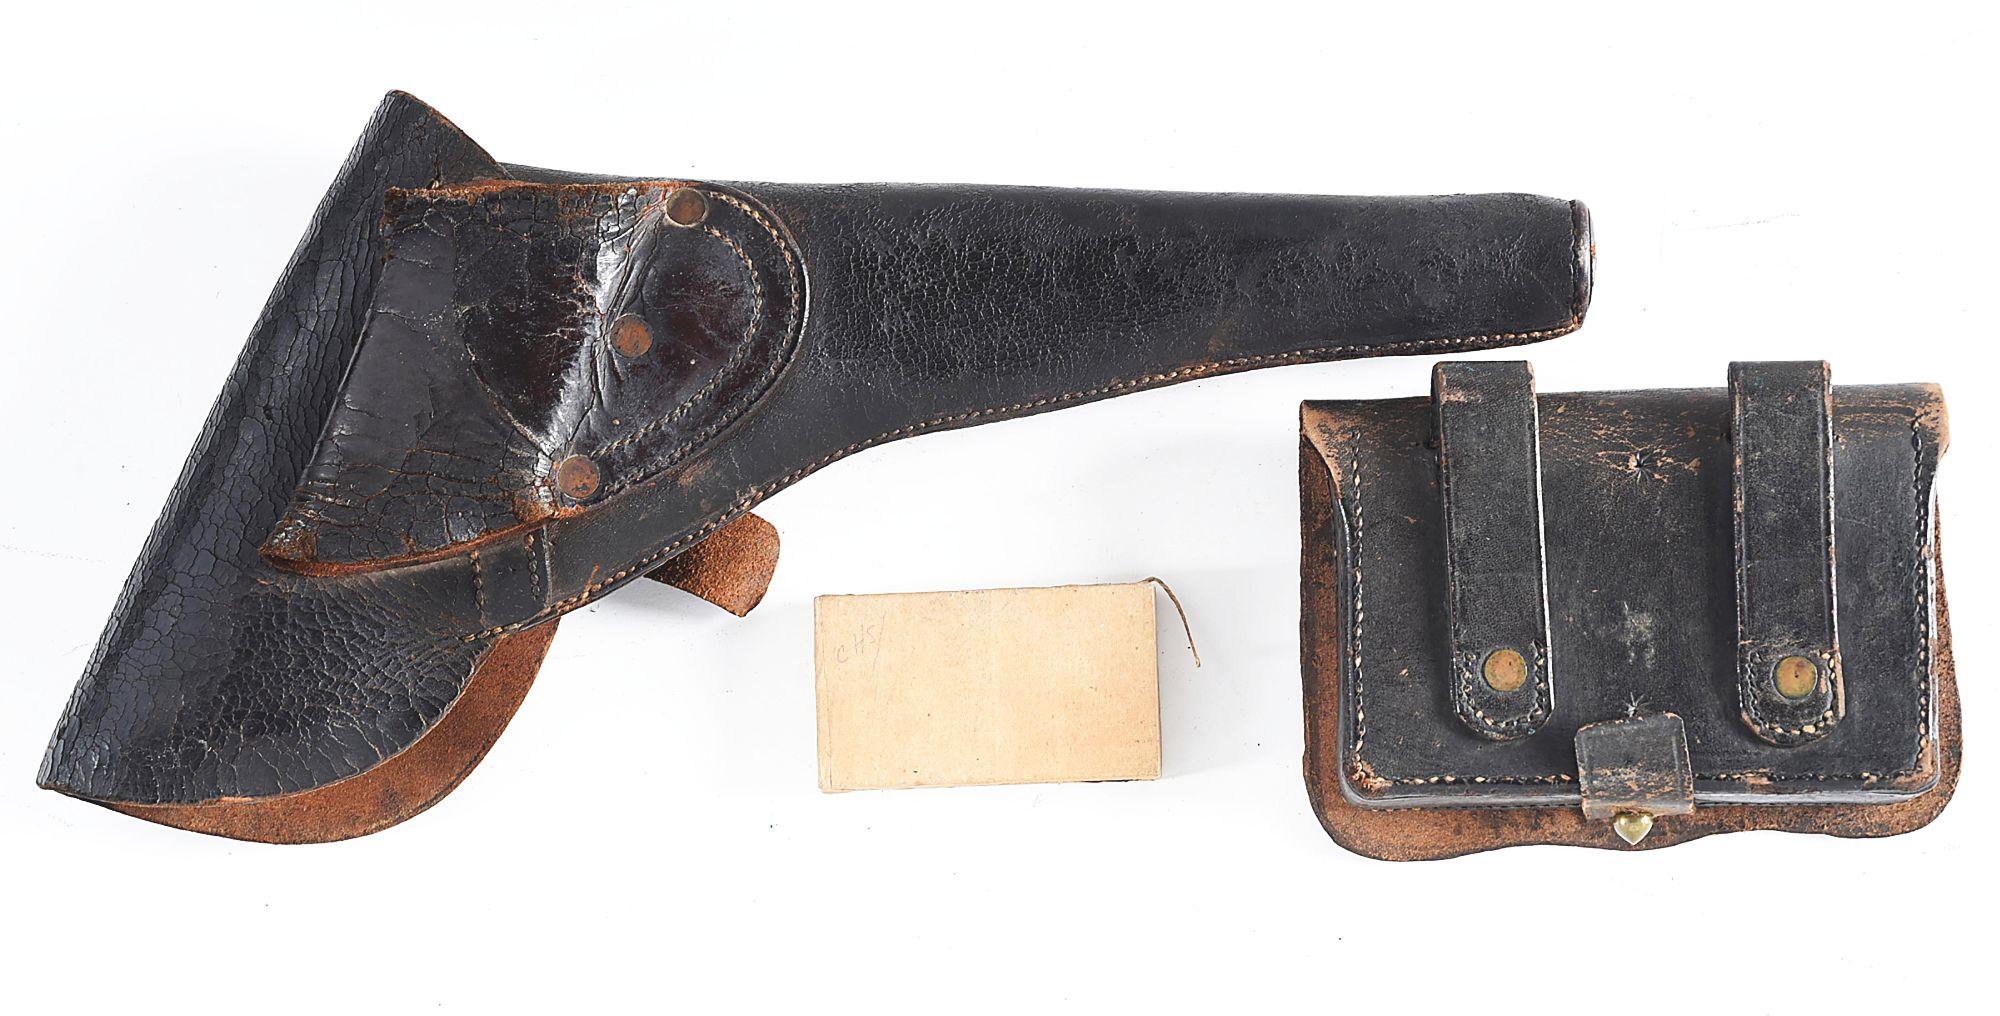 (A) COLT MODEL 1860 ARMY PERCUSSION REVOLVER IDENTIFIED TO PVT. JUSTIN HINDS, 1ST VERMONT CAV.